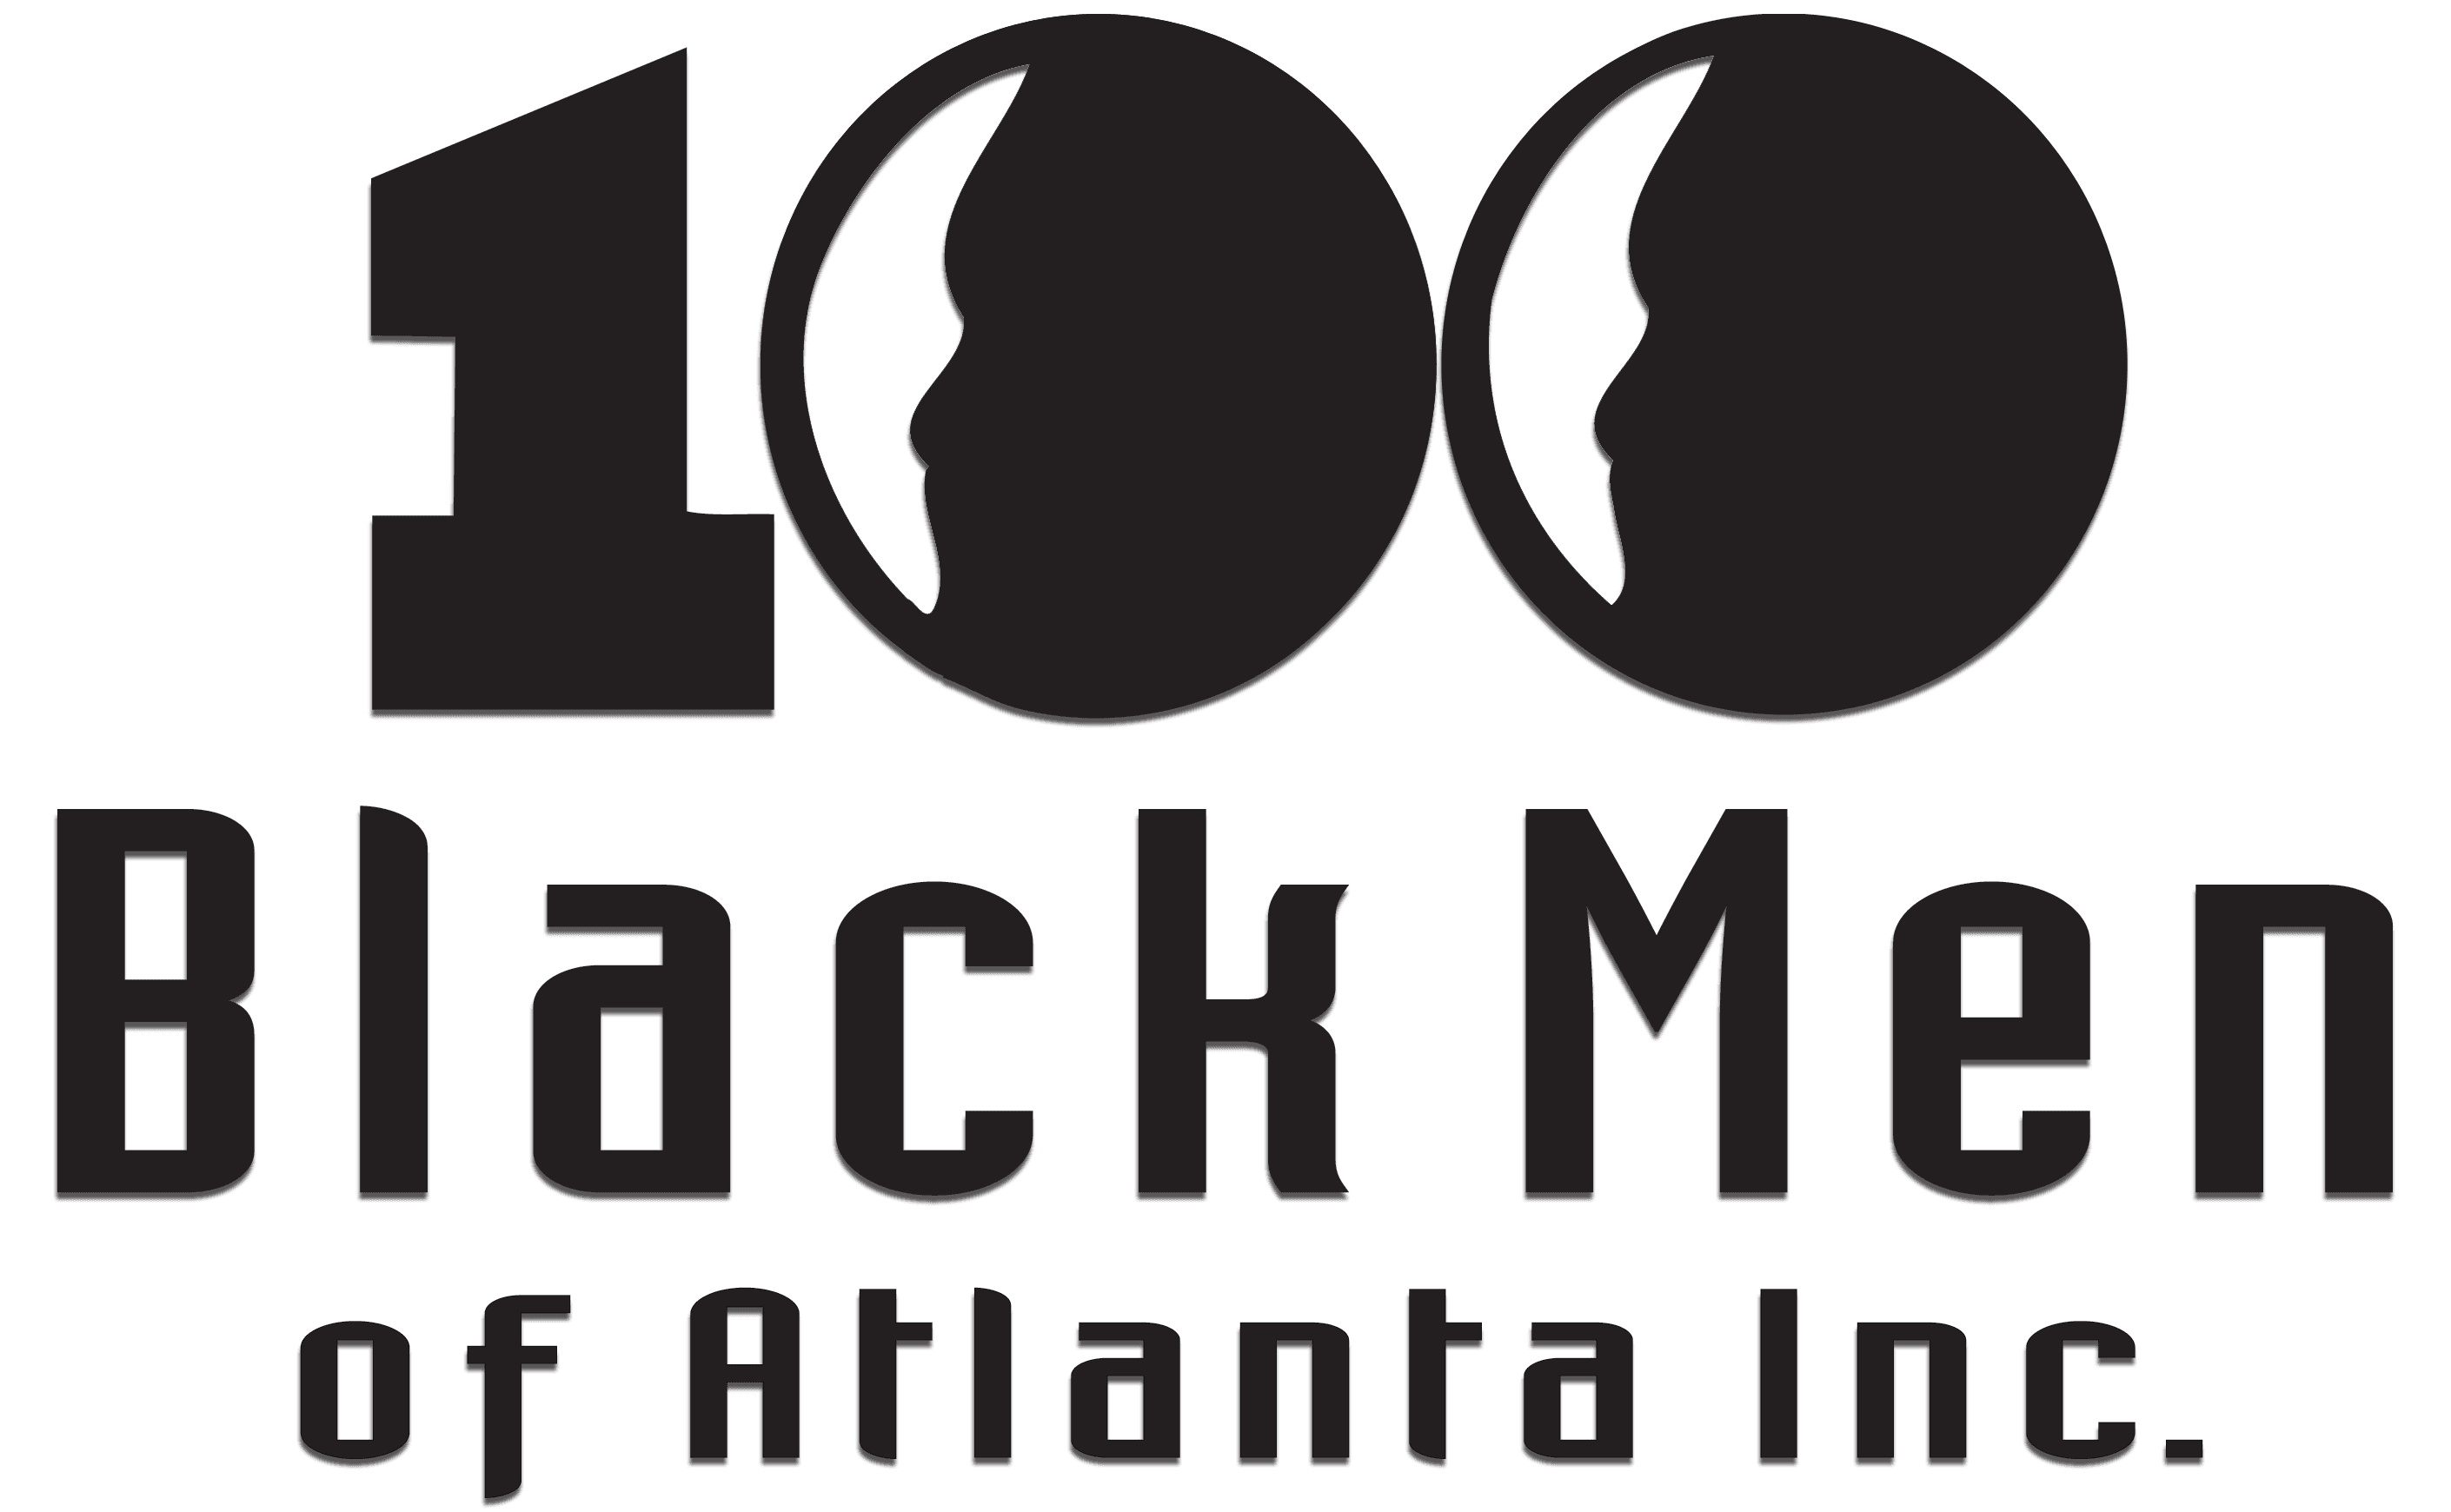 100 Black Men of Atlanta honored as ‘Large Chapter of the Year' by national organization